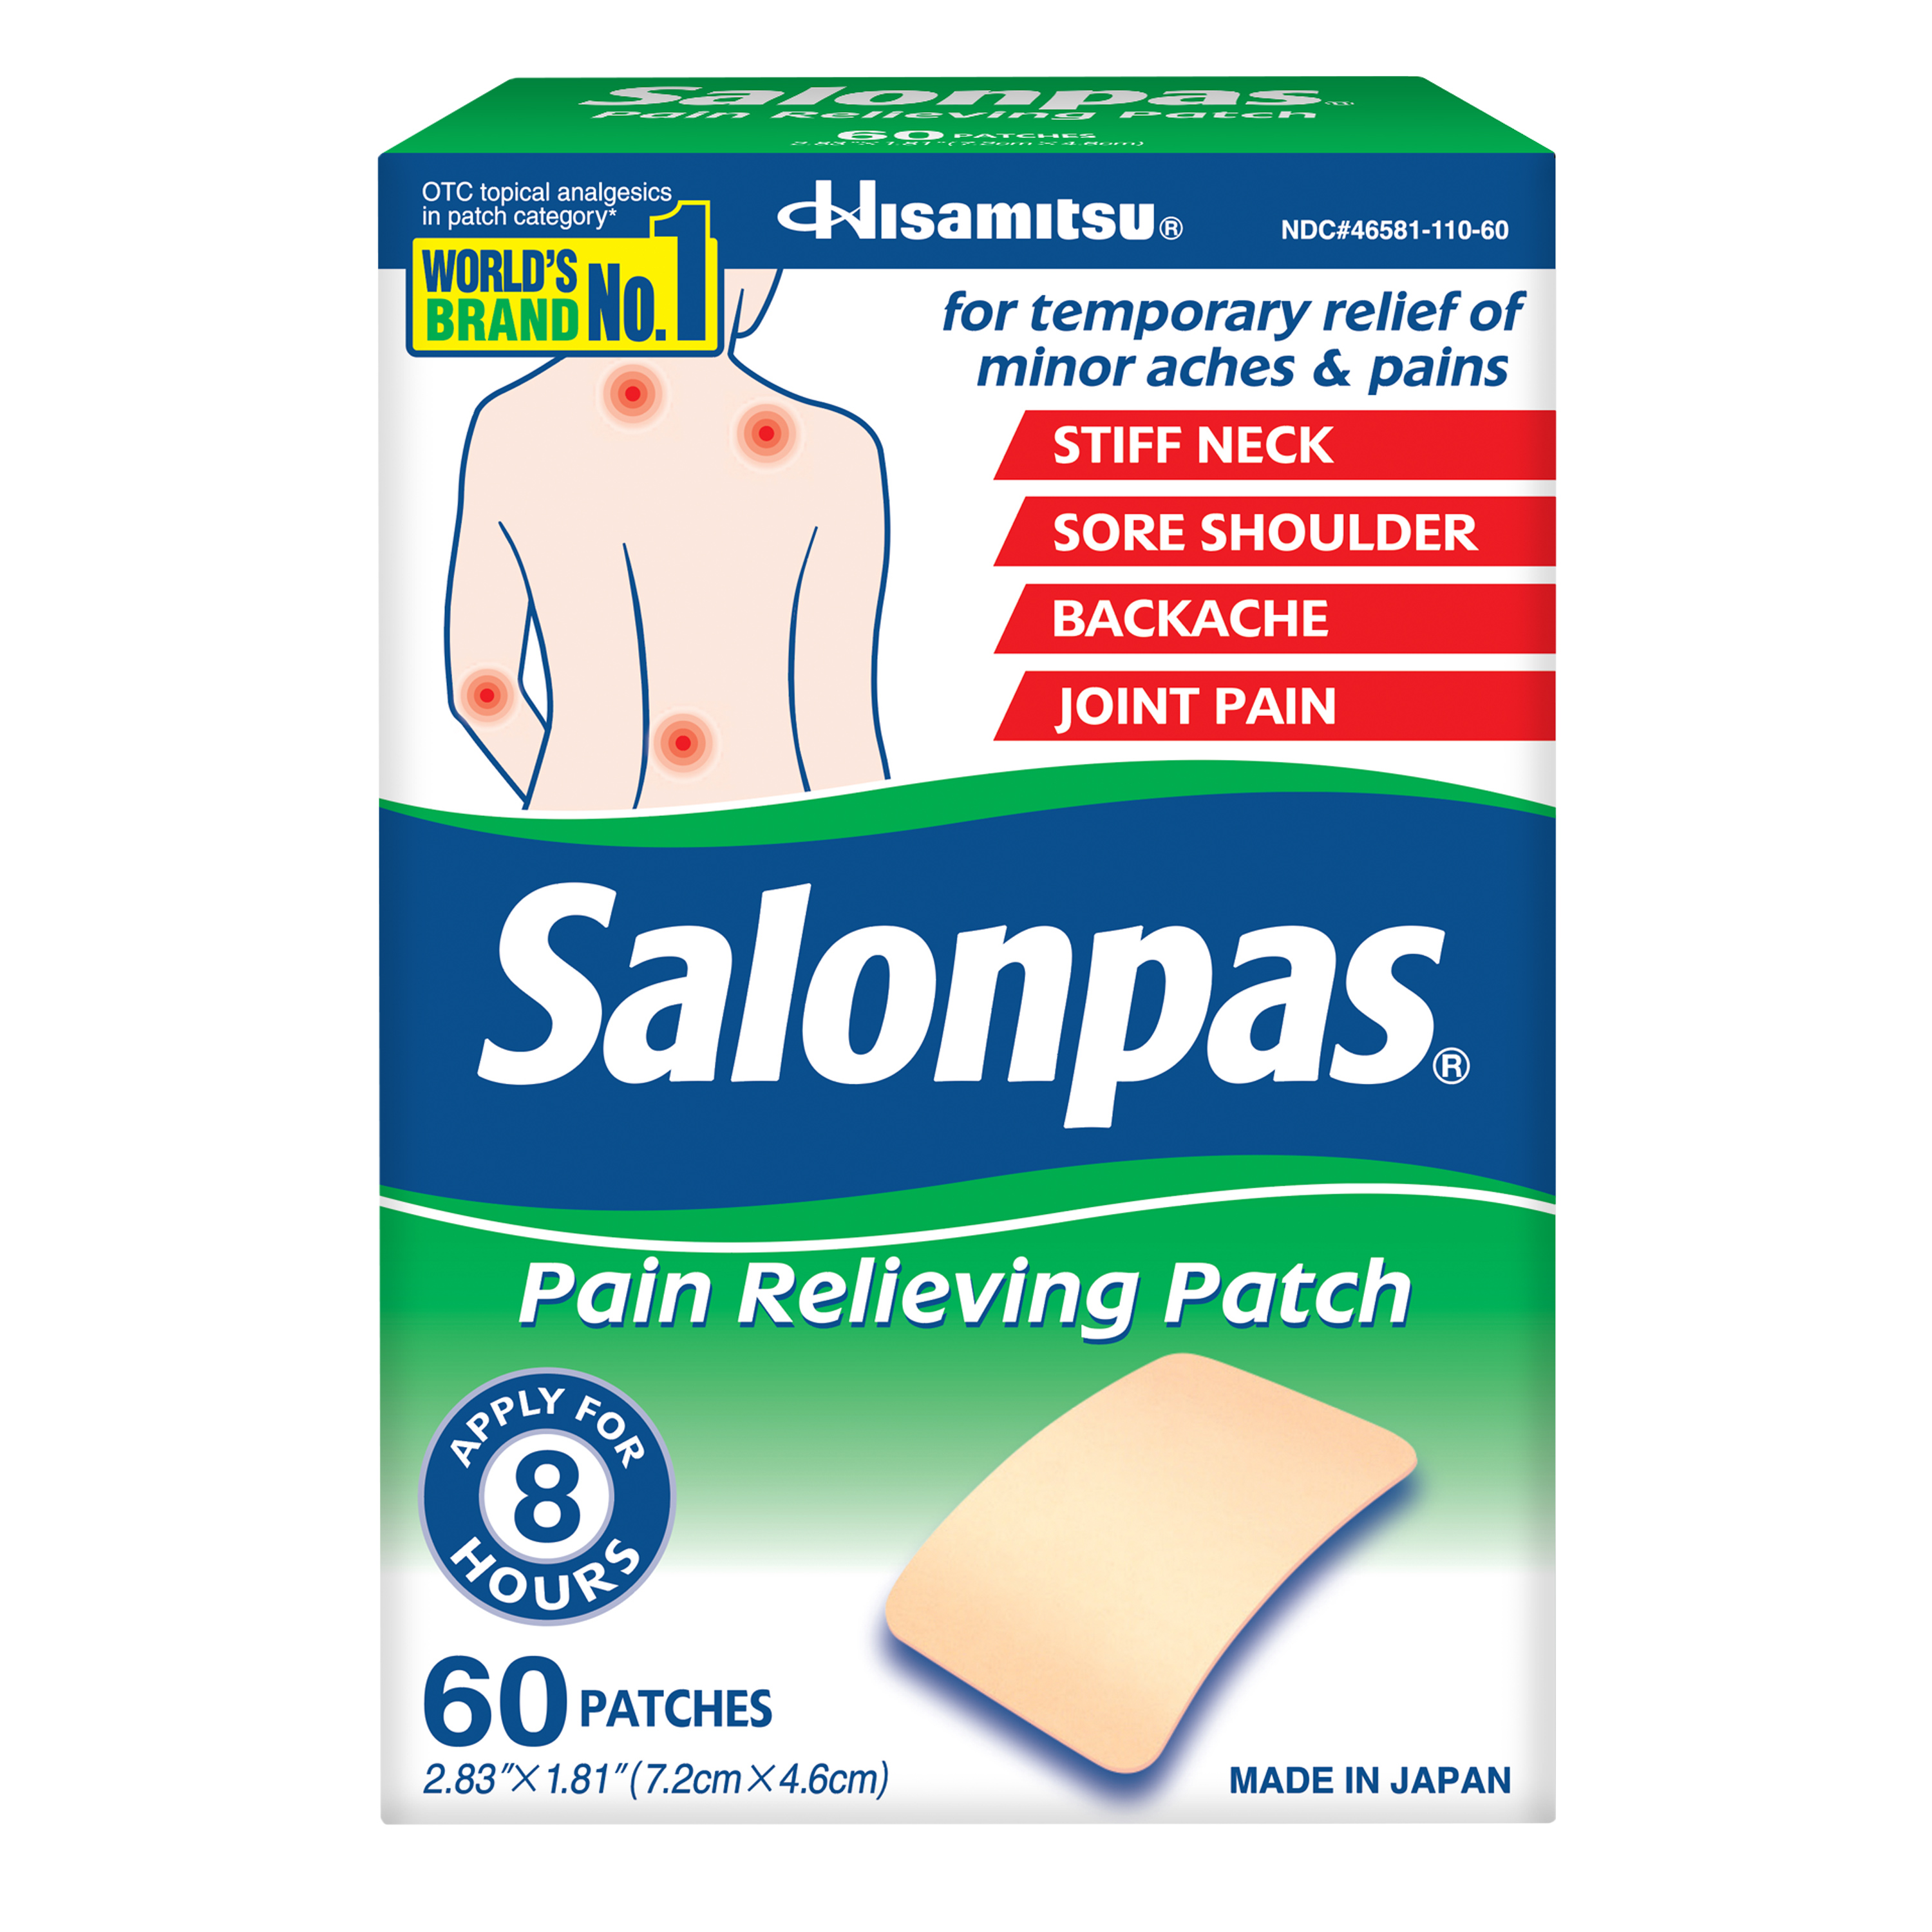 Salonpas Pain Relieving Patch, 60 count - image 1 of 9